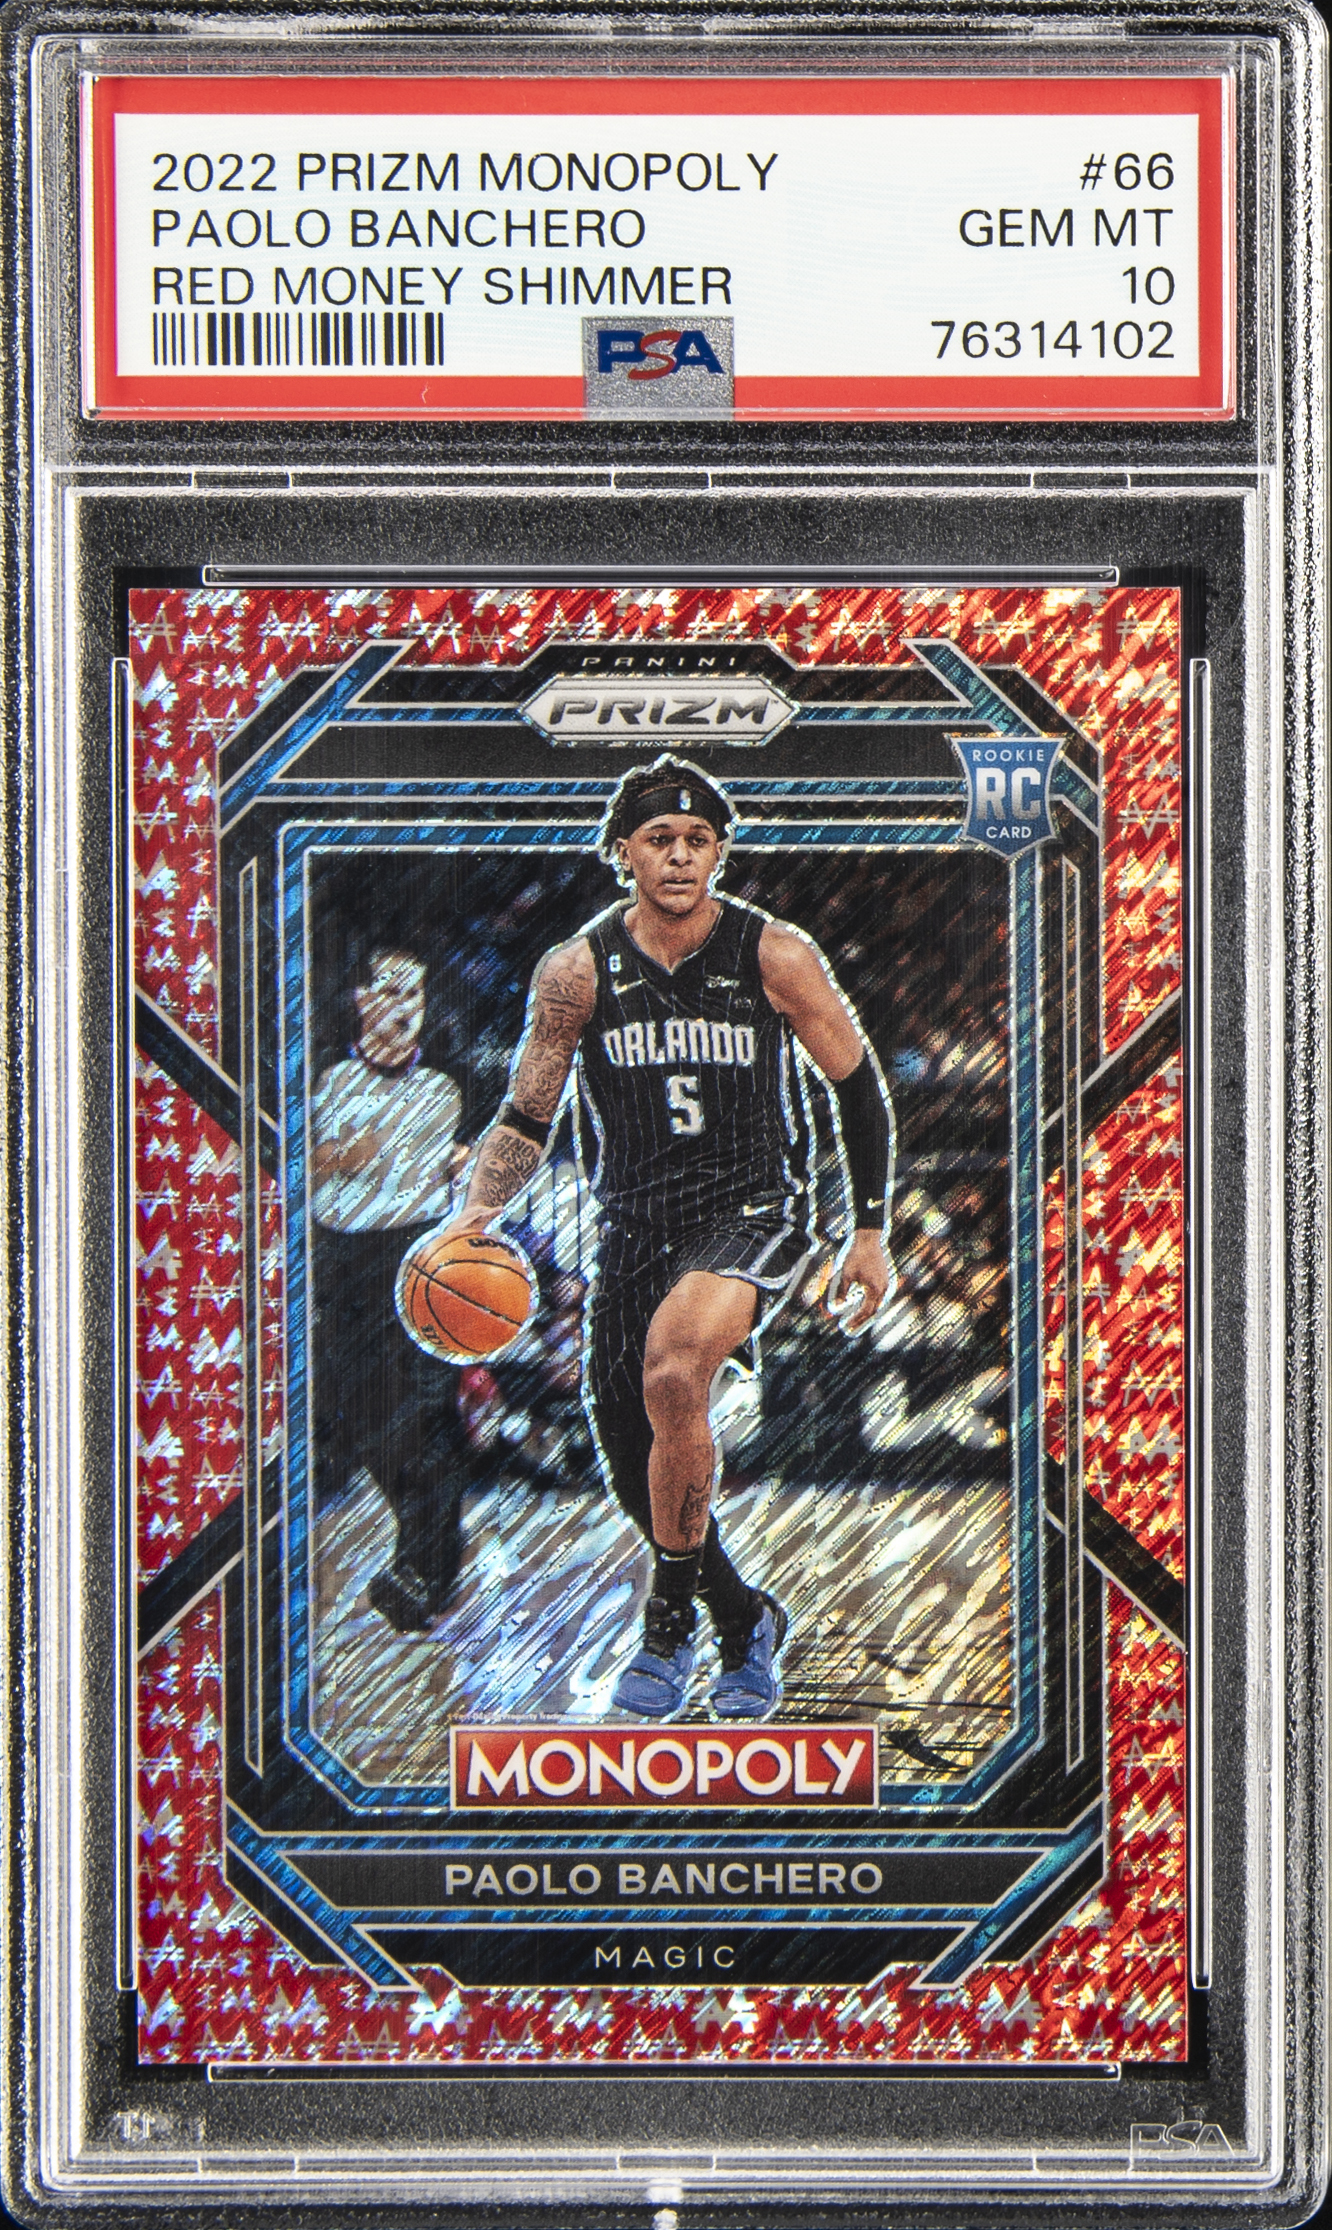 2022-23 Panini Prizm Monopoly Red Money Shimmer #66 Paolo Banchero Rookie Card (#020/100) – PSA GEM MT 10